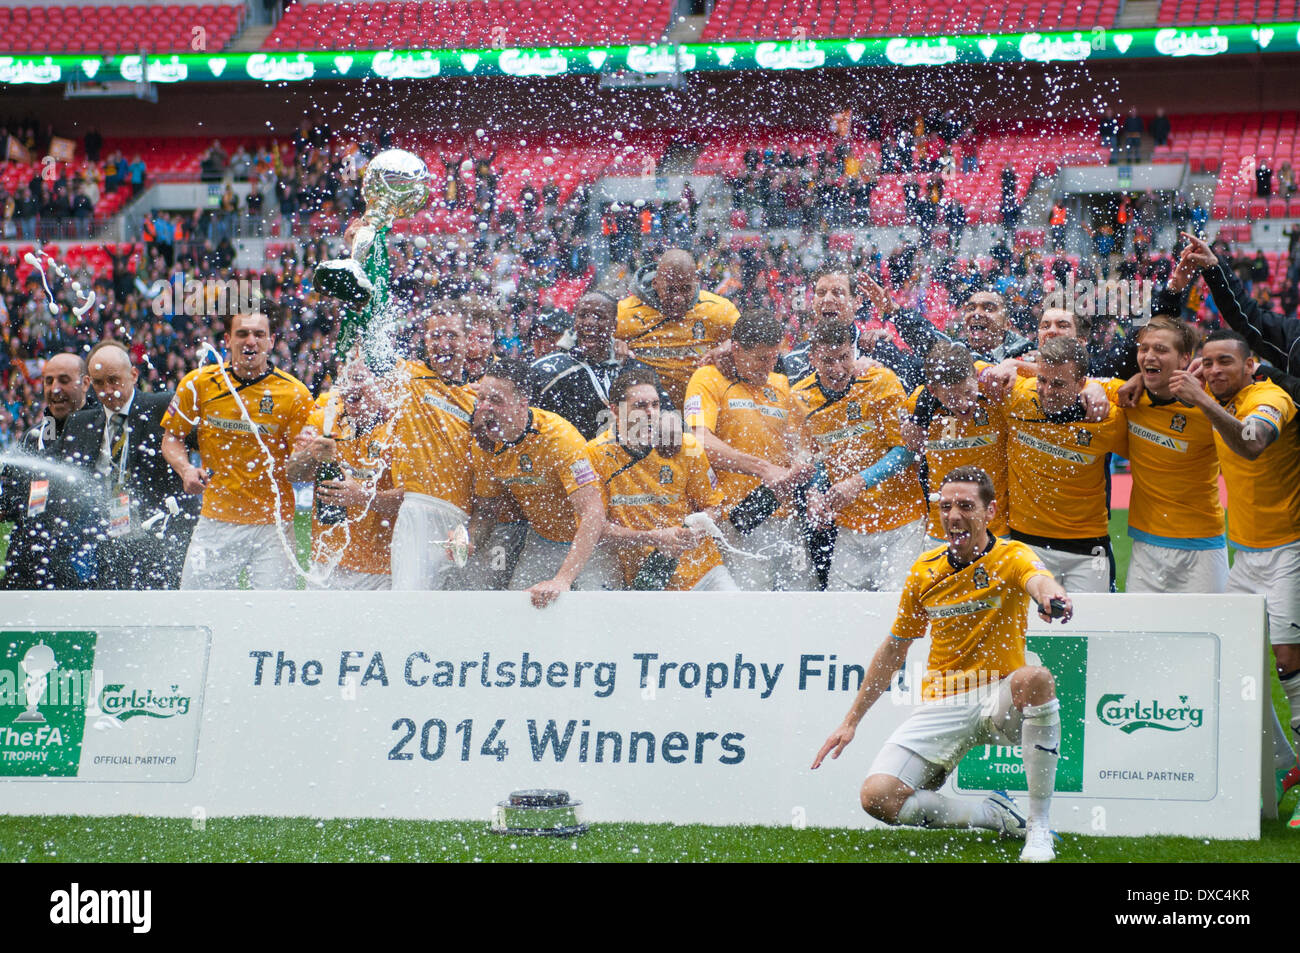 Cambridge United FC celebrate with the FA Trophy after defeating Gosport Borough FC at Wembley Stadium on the 23rd of March 2014. © Flashspix/Alamy Live News Credit:  Flashspix/Alamy Live News Stock Photo